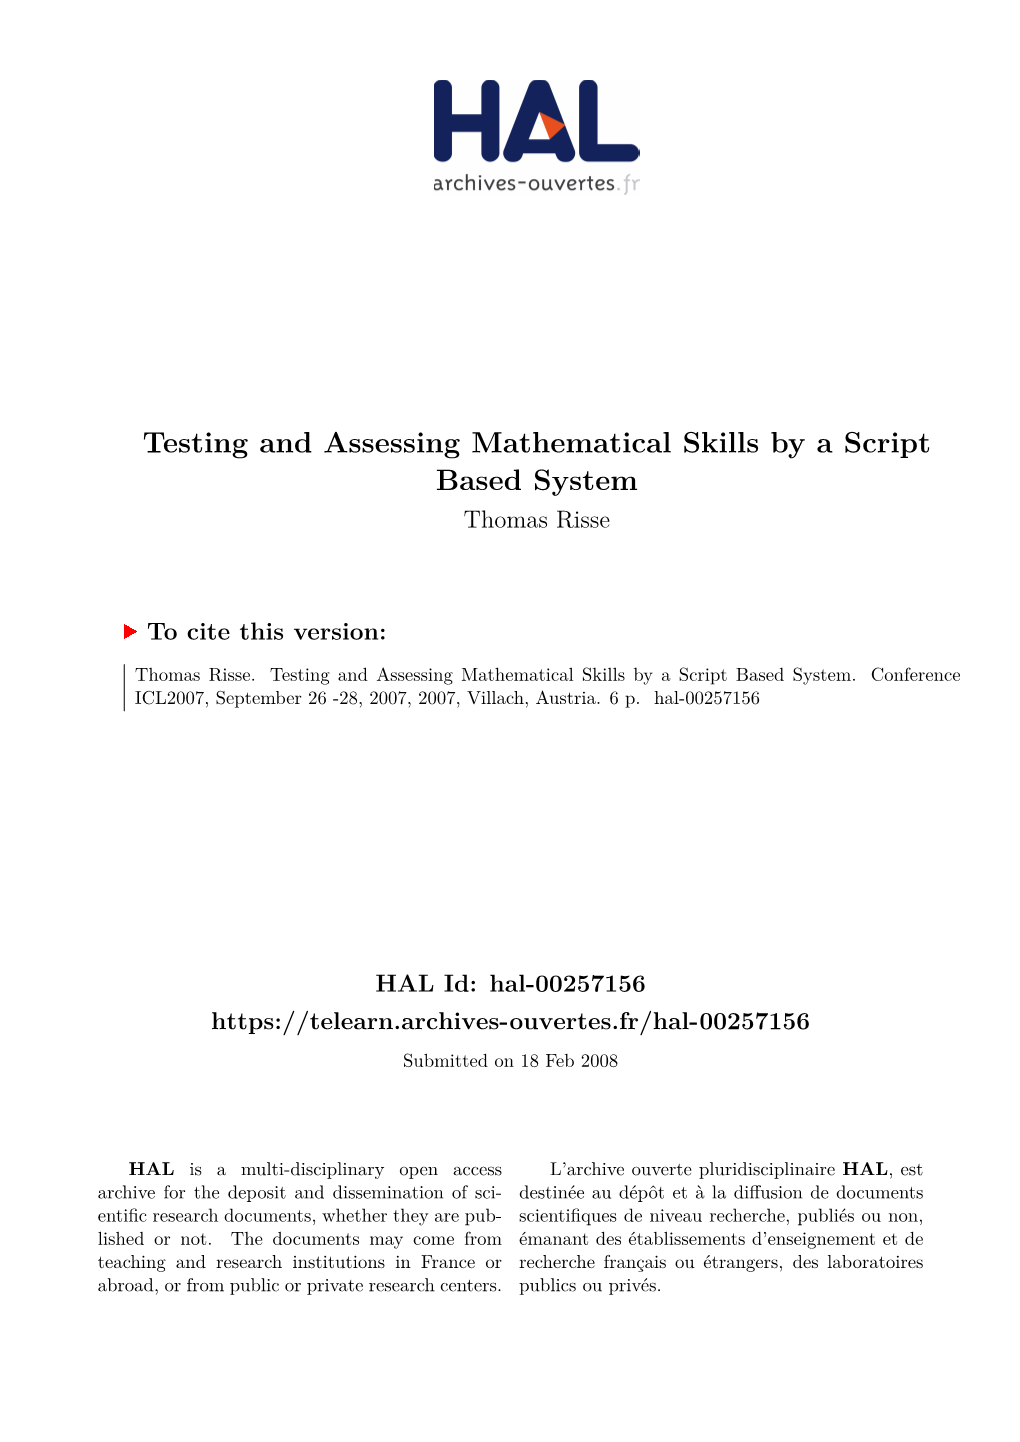 Testing and Assessing Mathematical Skills by a Script Based System Thomas Risse